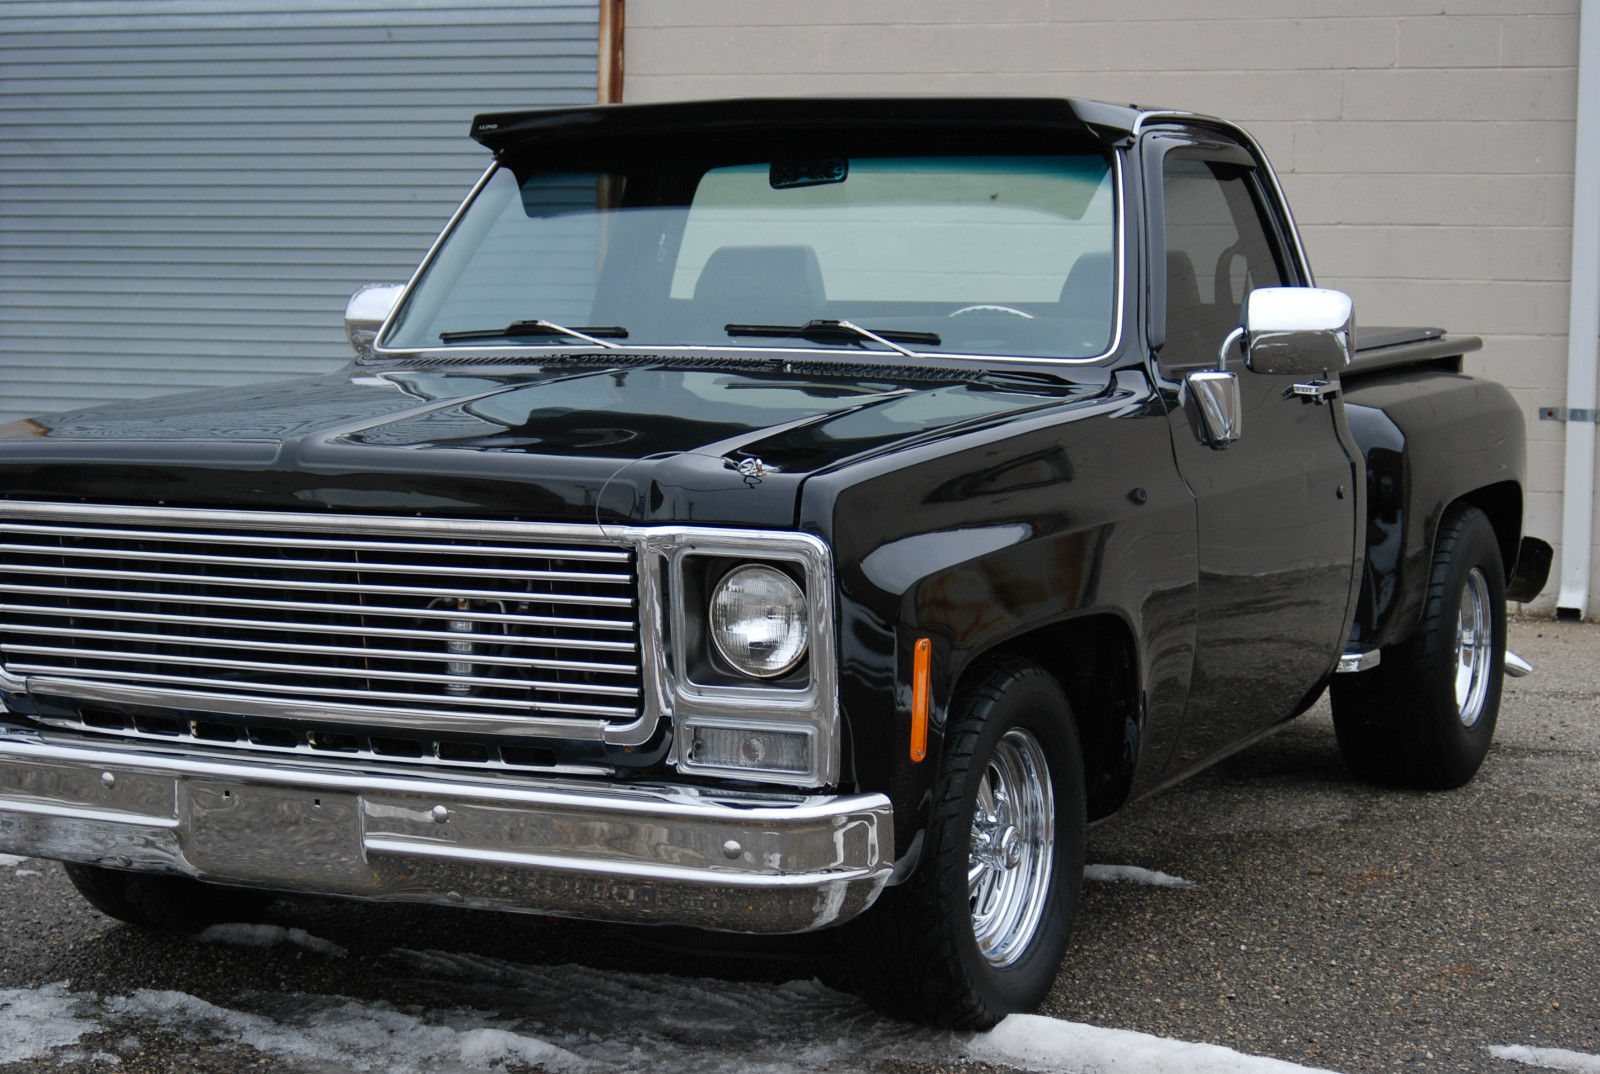 1980 C10 Chevrolet Bed Short Side Deluxe Step Lowered Ride Air States Unite...